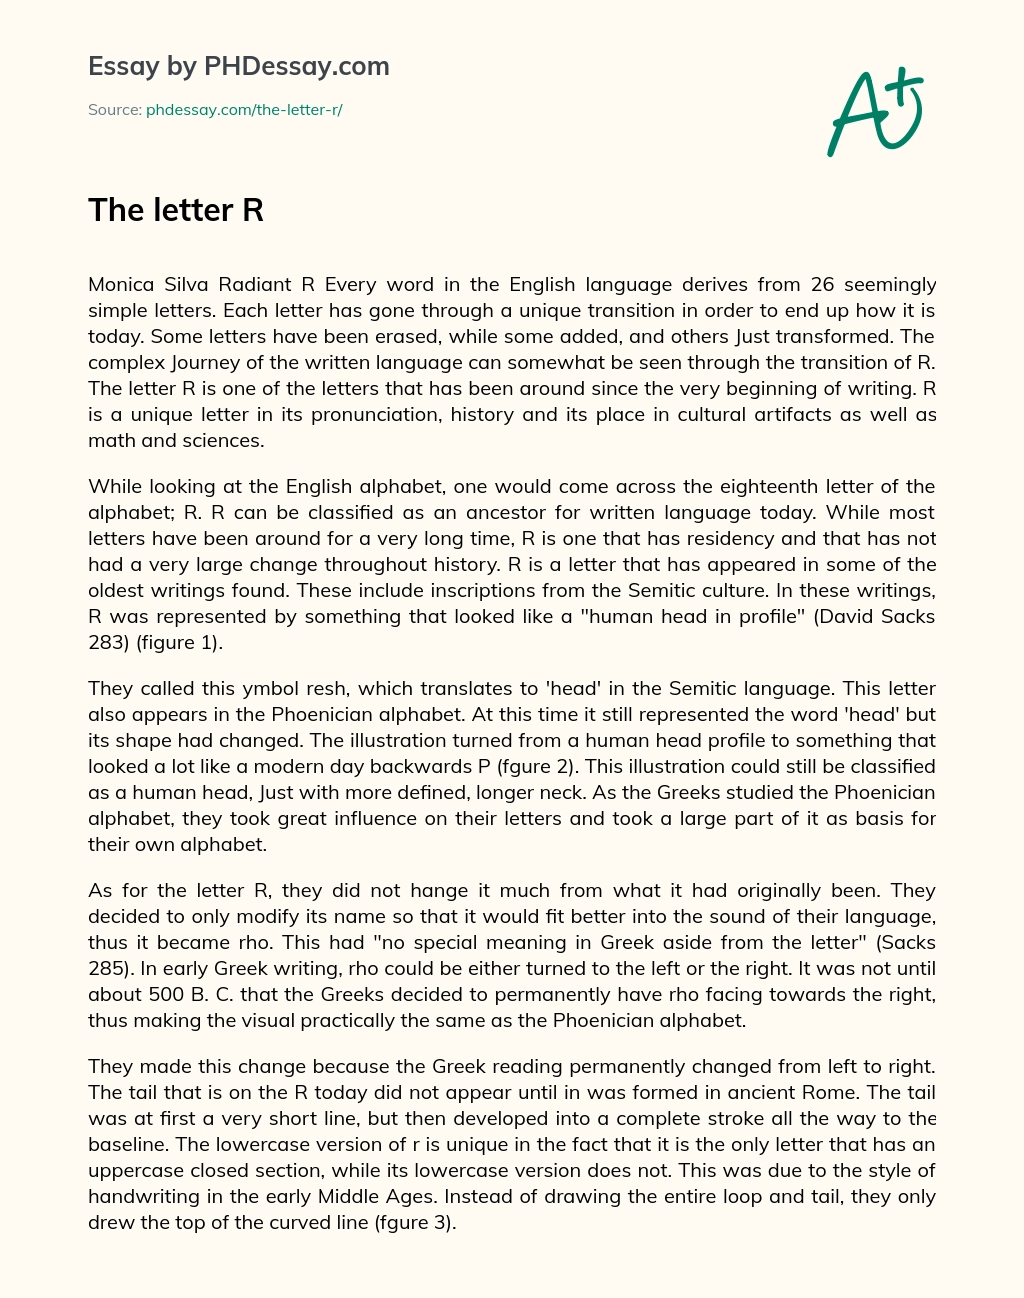 The Journey of the Letter R: Its Unique Place in Written Language and History essay